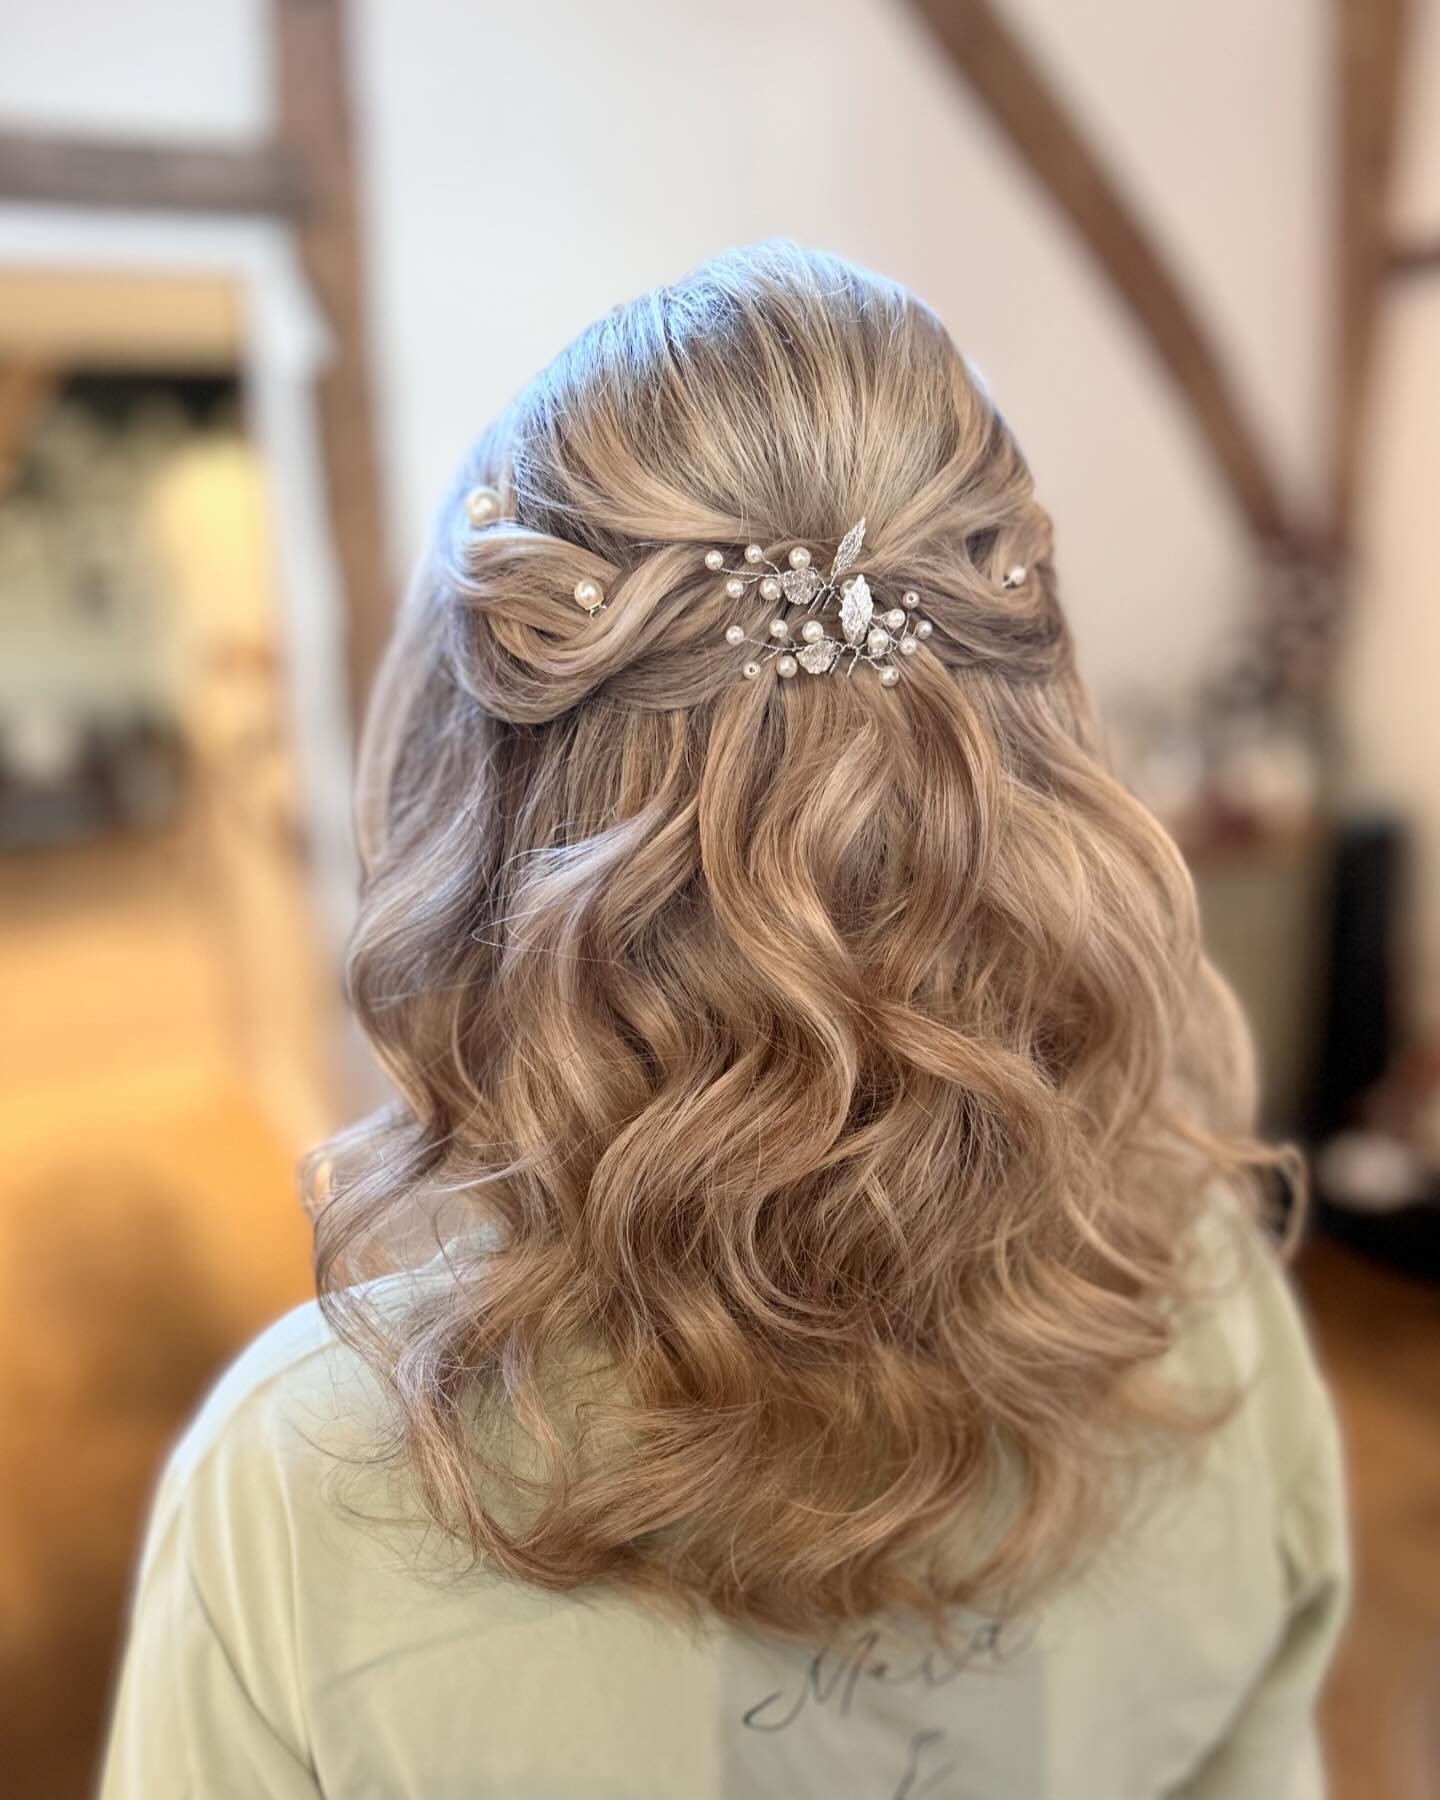 My girls are still in love with the Half up Half down 💖
Bridesmaid for the lovely Emma @eastongrange 

Save &amp; love ❤️ 

#halfuphalfdownhairstyle #halfup #bridalhairsuffolk #bridalhairessex #bridesmaidsinsporation #💖 
Photographer @gemmagiorgio 